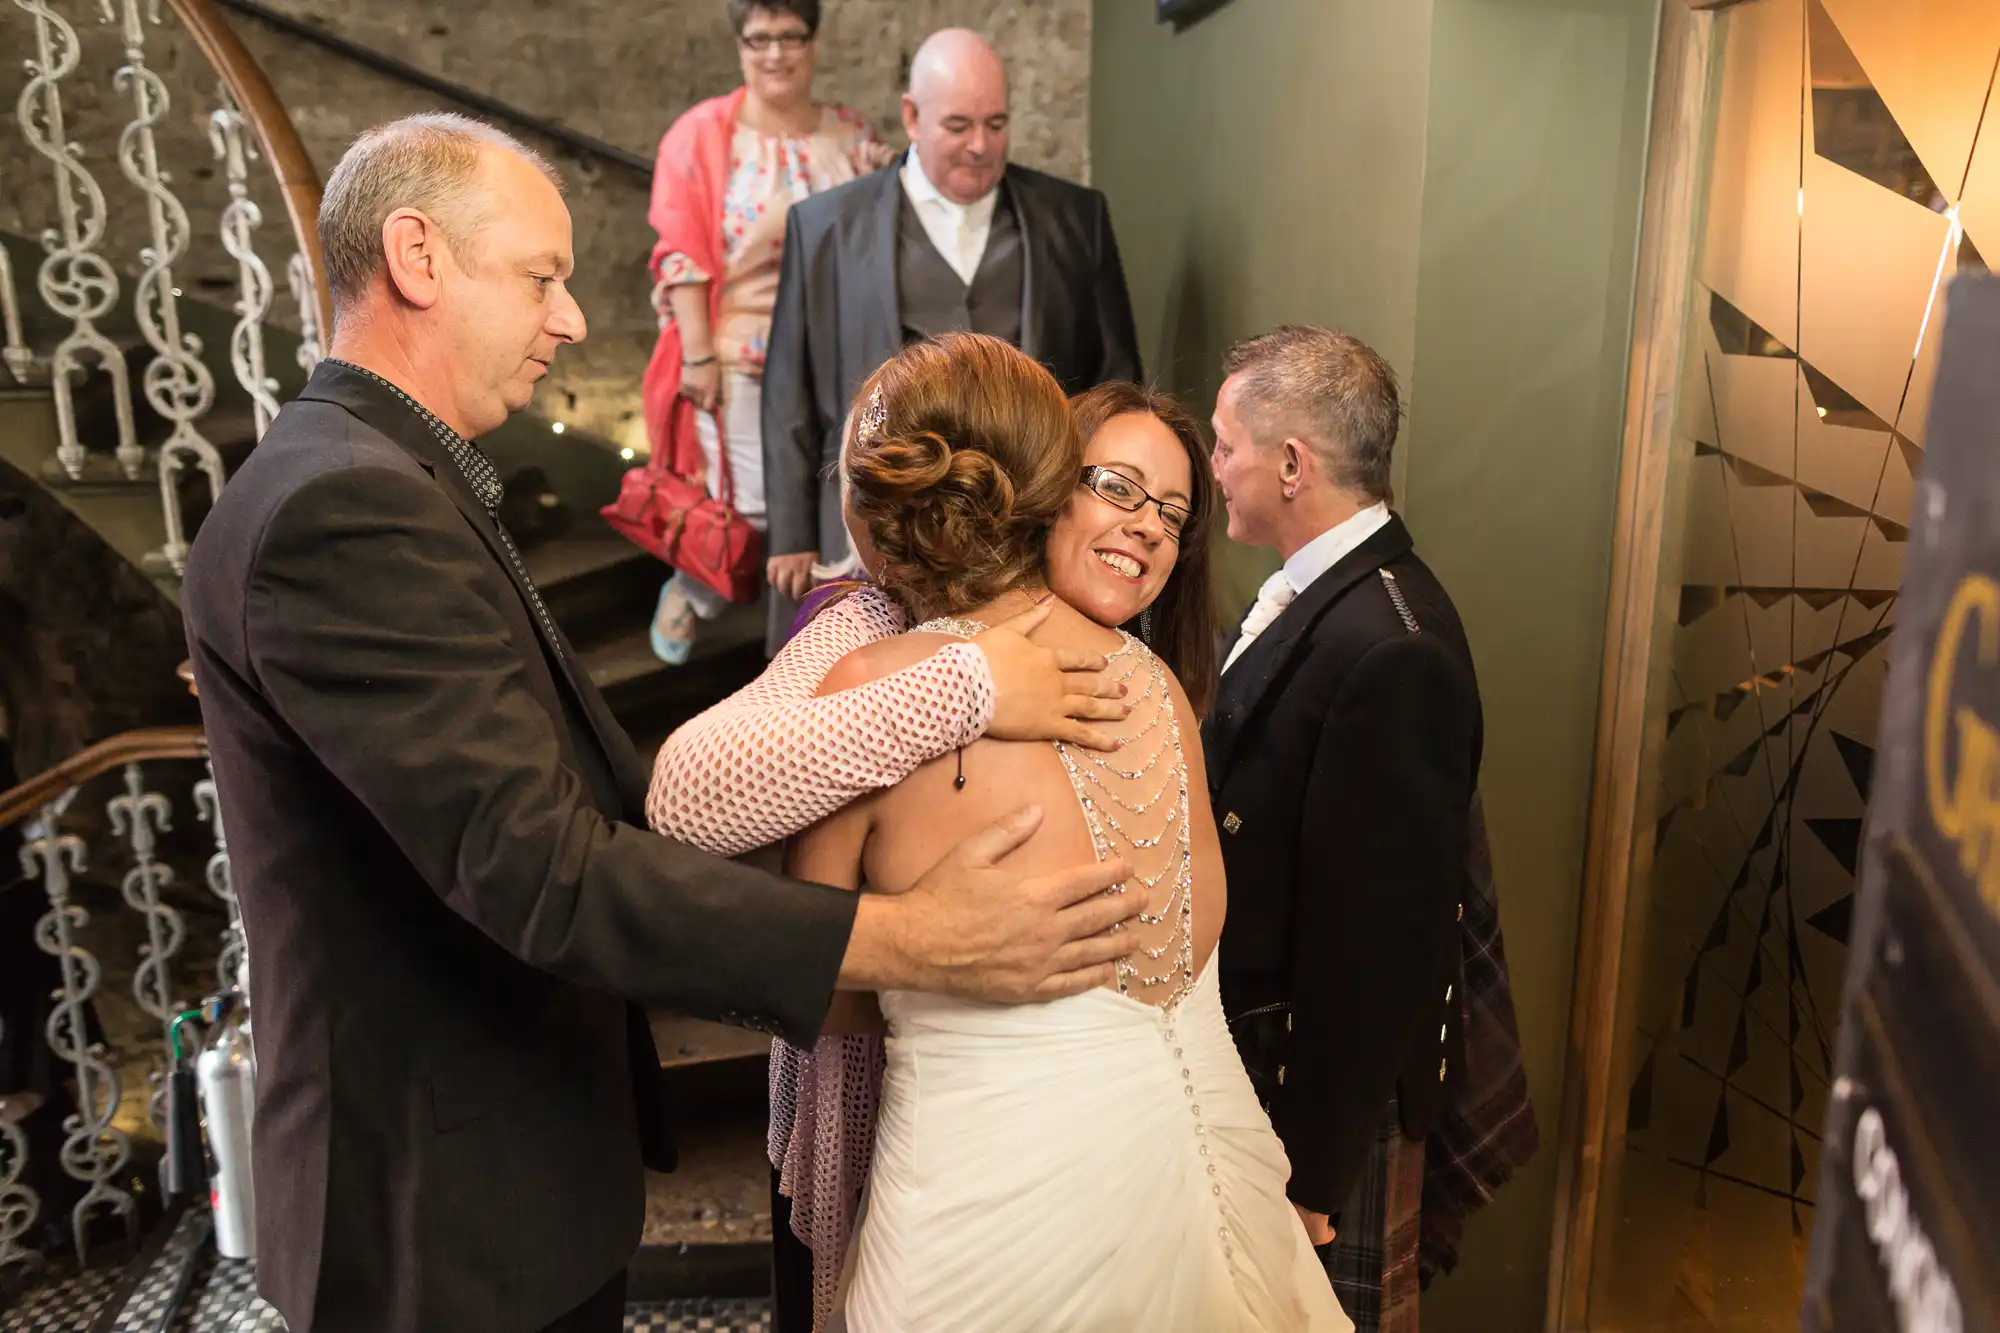 A bride in a white dress embracing a woman at the bottom of a staircase, with three guests smiling and looking on.